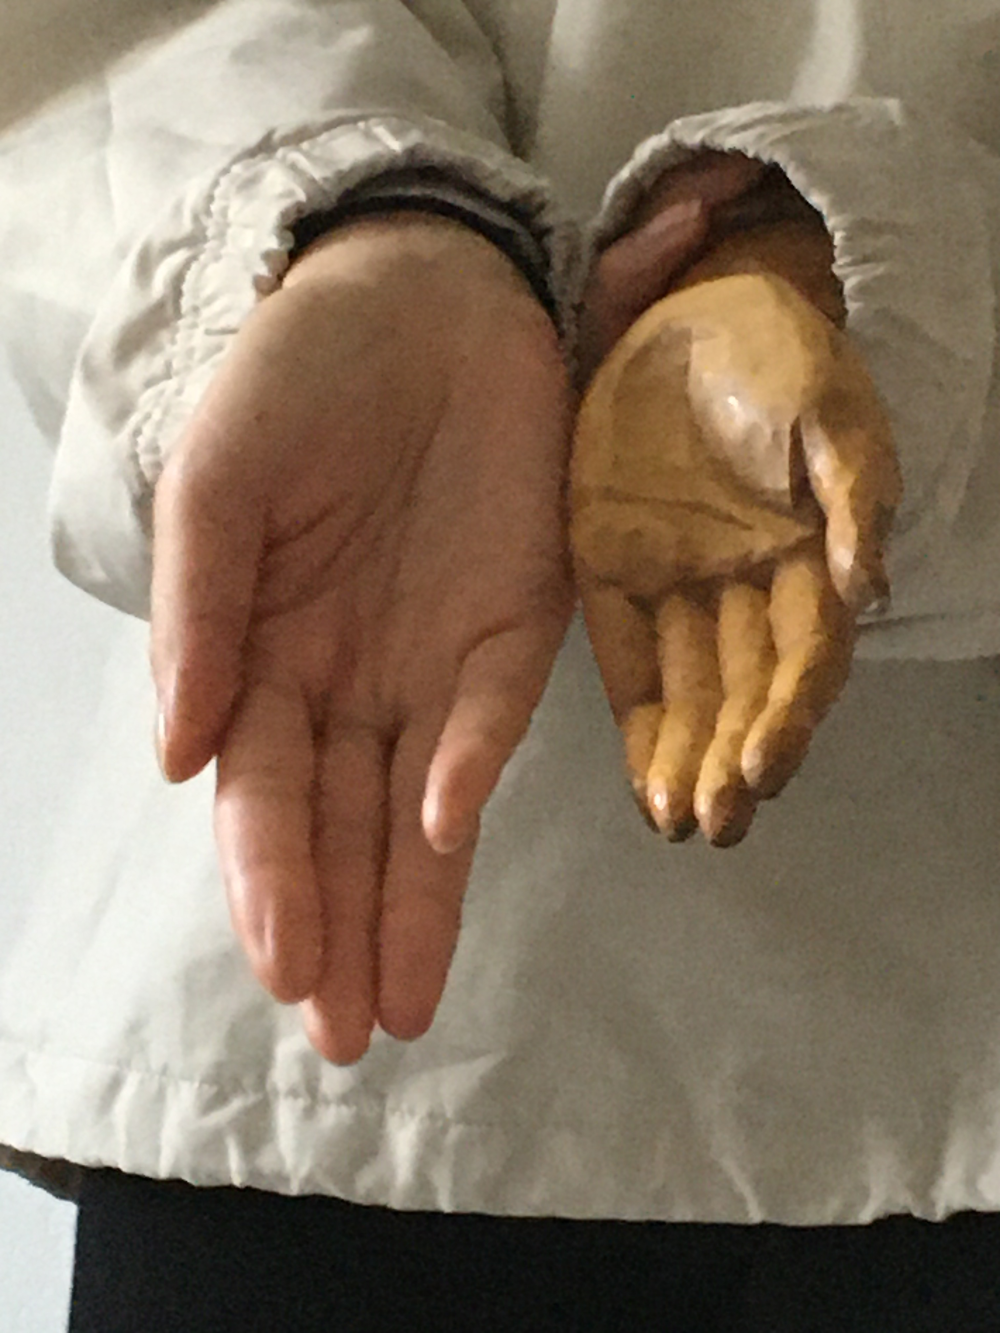 One flesh and one wooden hand with palms facing the camera